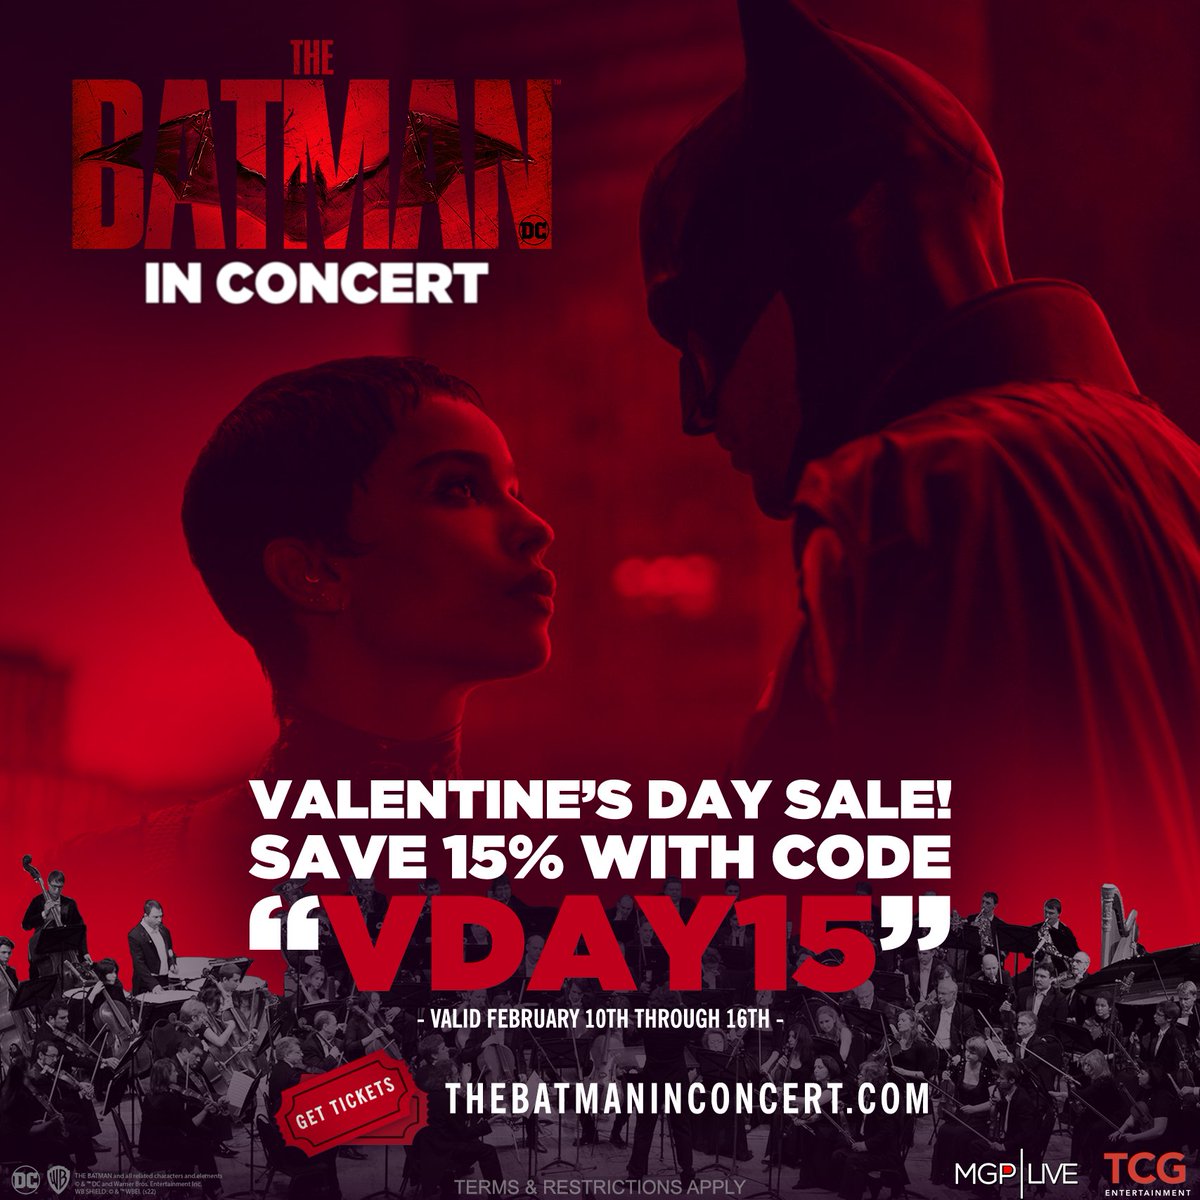 Embark on a thrilling night in Gotham City! See #TheBatmanInConcert with a live symphony orchestra performing alongside the film. From 2/10-2/16, use code “VDAY15” and get 15% off on your tickets! Tickets at: thebatmaninconcert.com